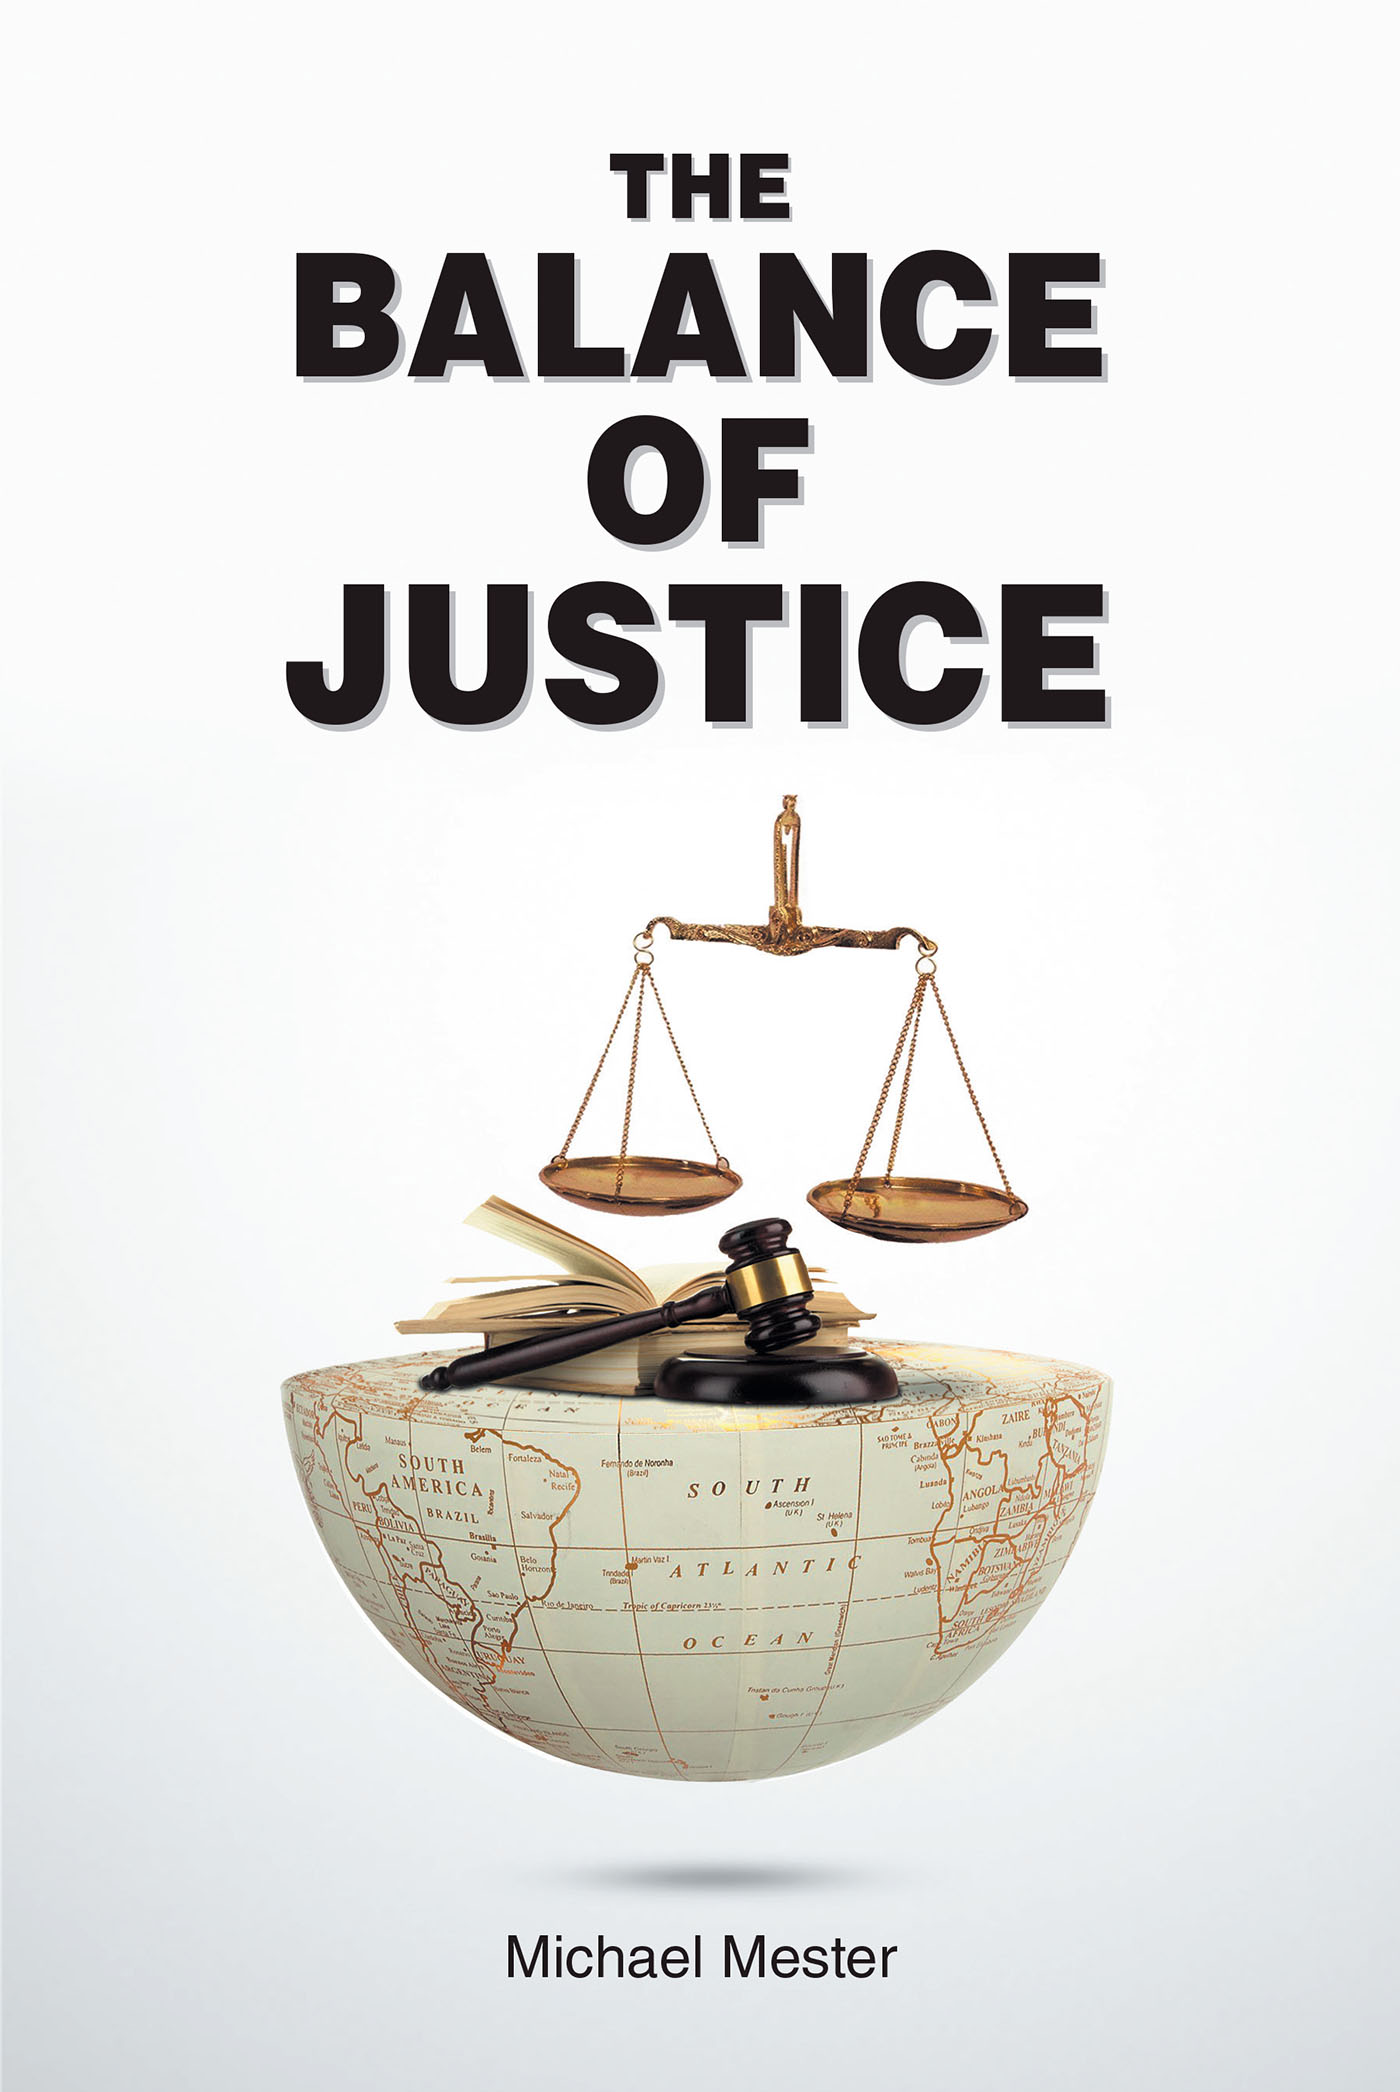 Michael Mester’s Newly Released "The Balance of Justice" is a Thought-Provoking Discussion of Effective Business for the Average Citizen